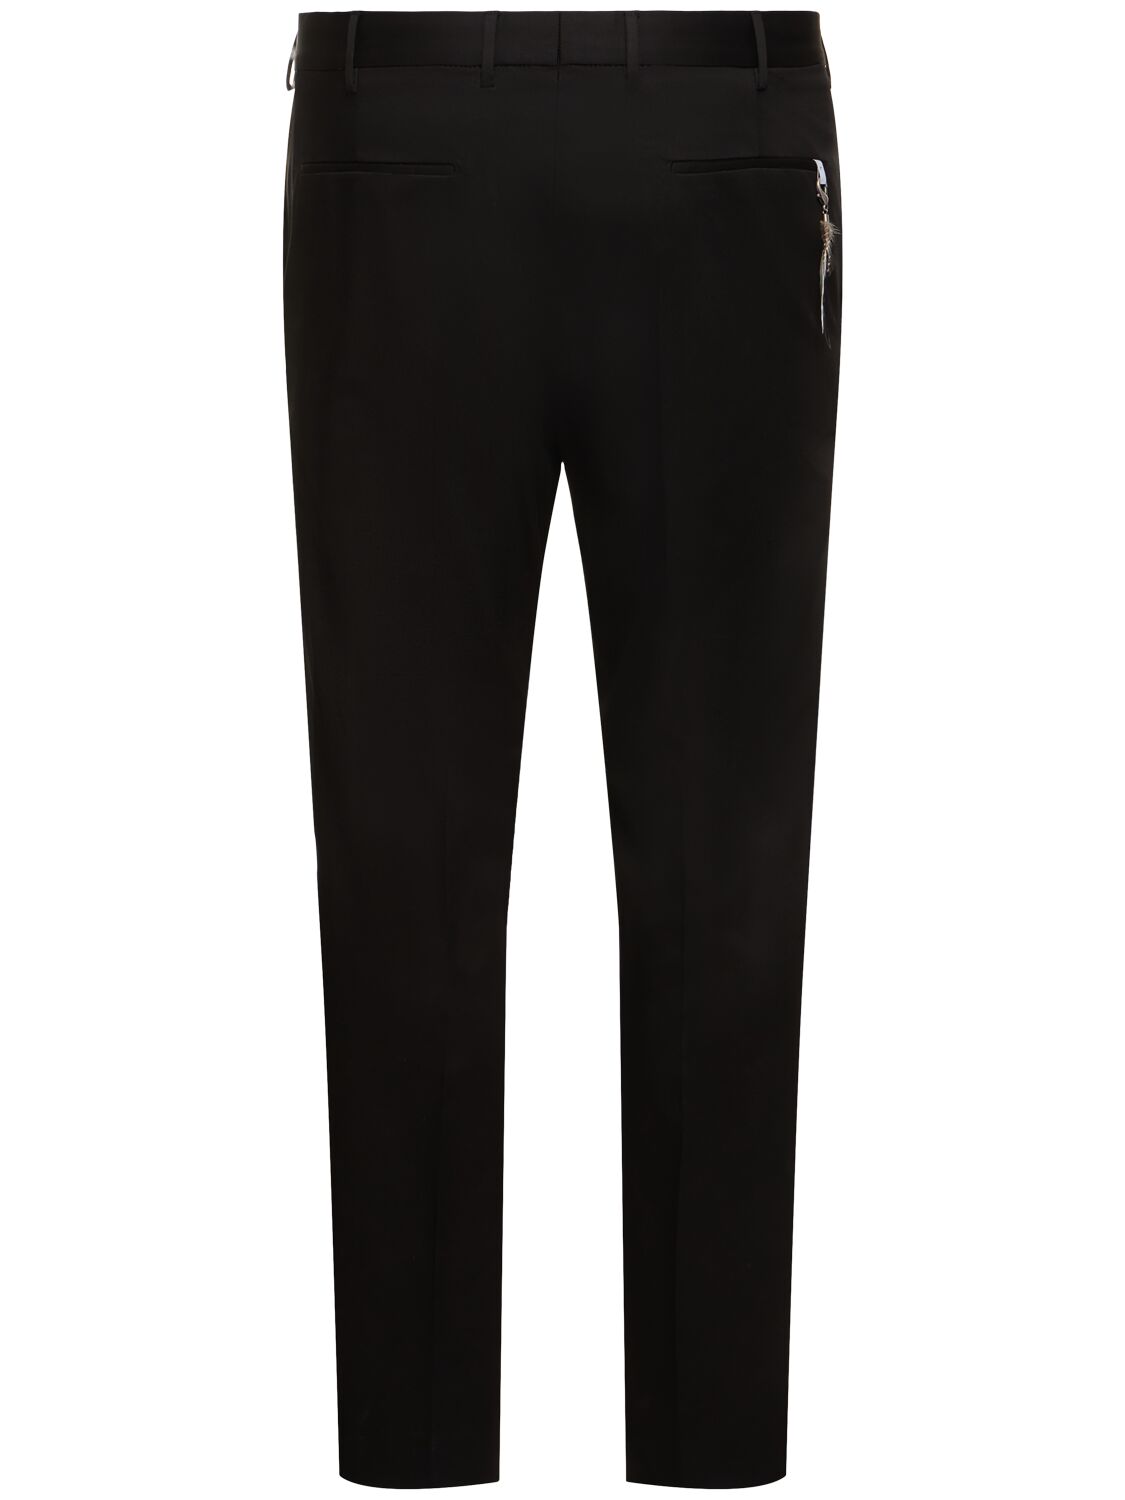 Shop Pt Torino Dieci Pleated Cotton Twill Pants In Black